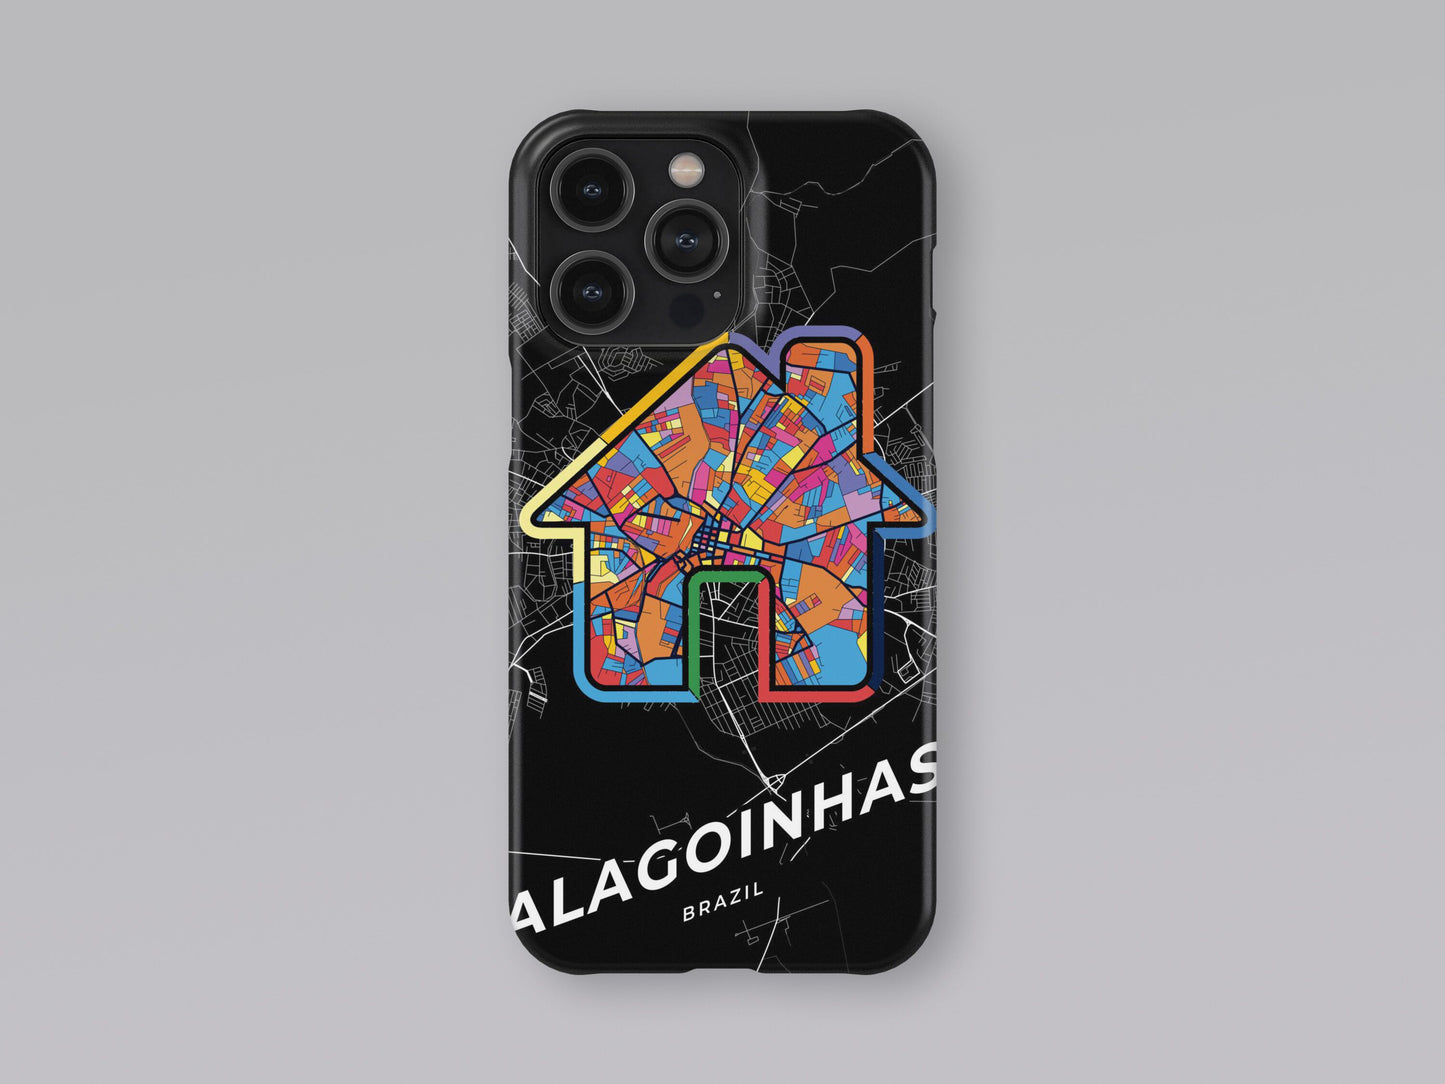 Alagoinhas Brazil slim phone case with colorful icon. Birthday, wedding or housewarming gift. Couple match cases. 3